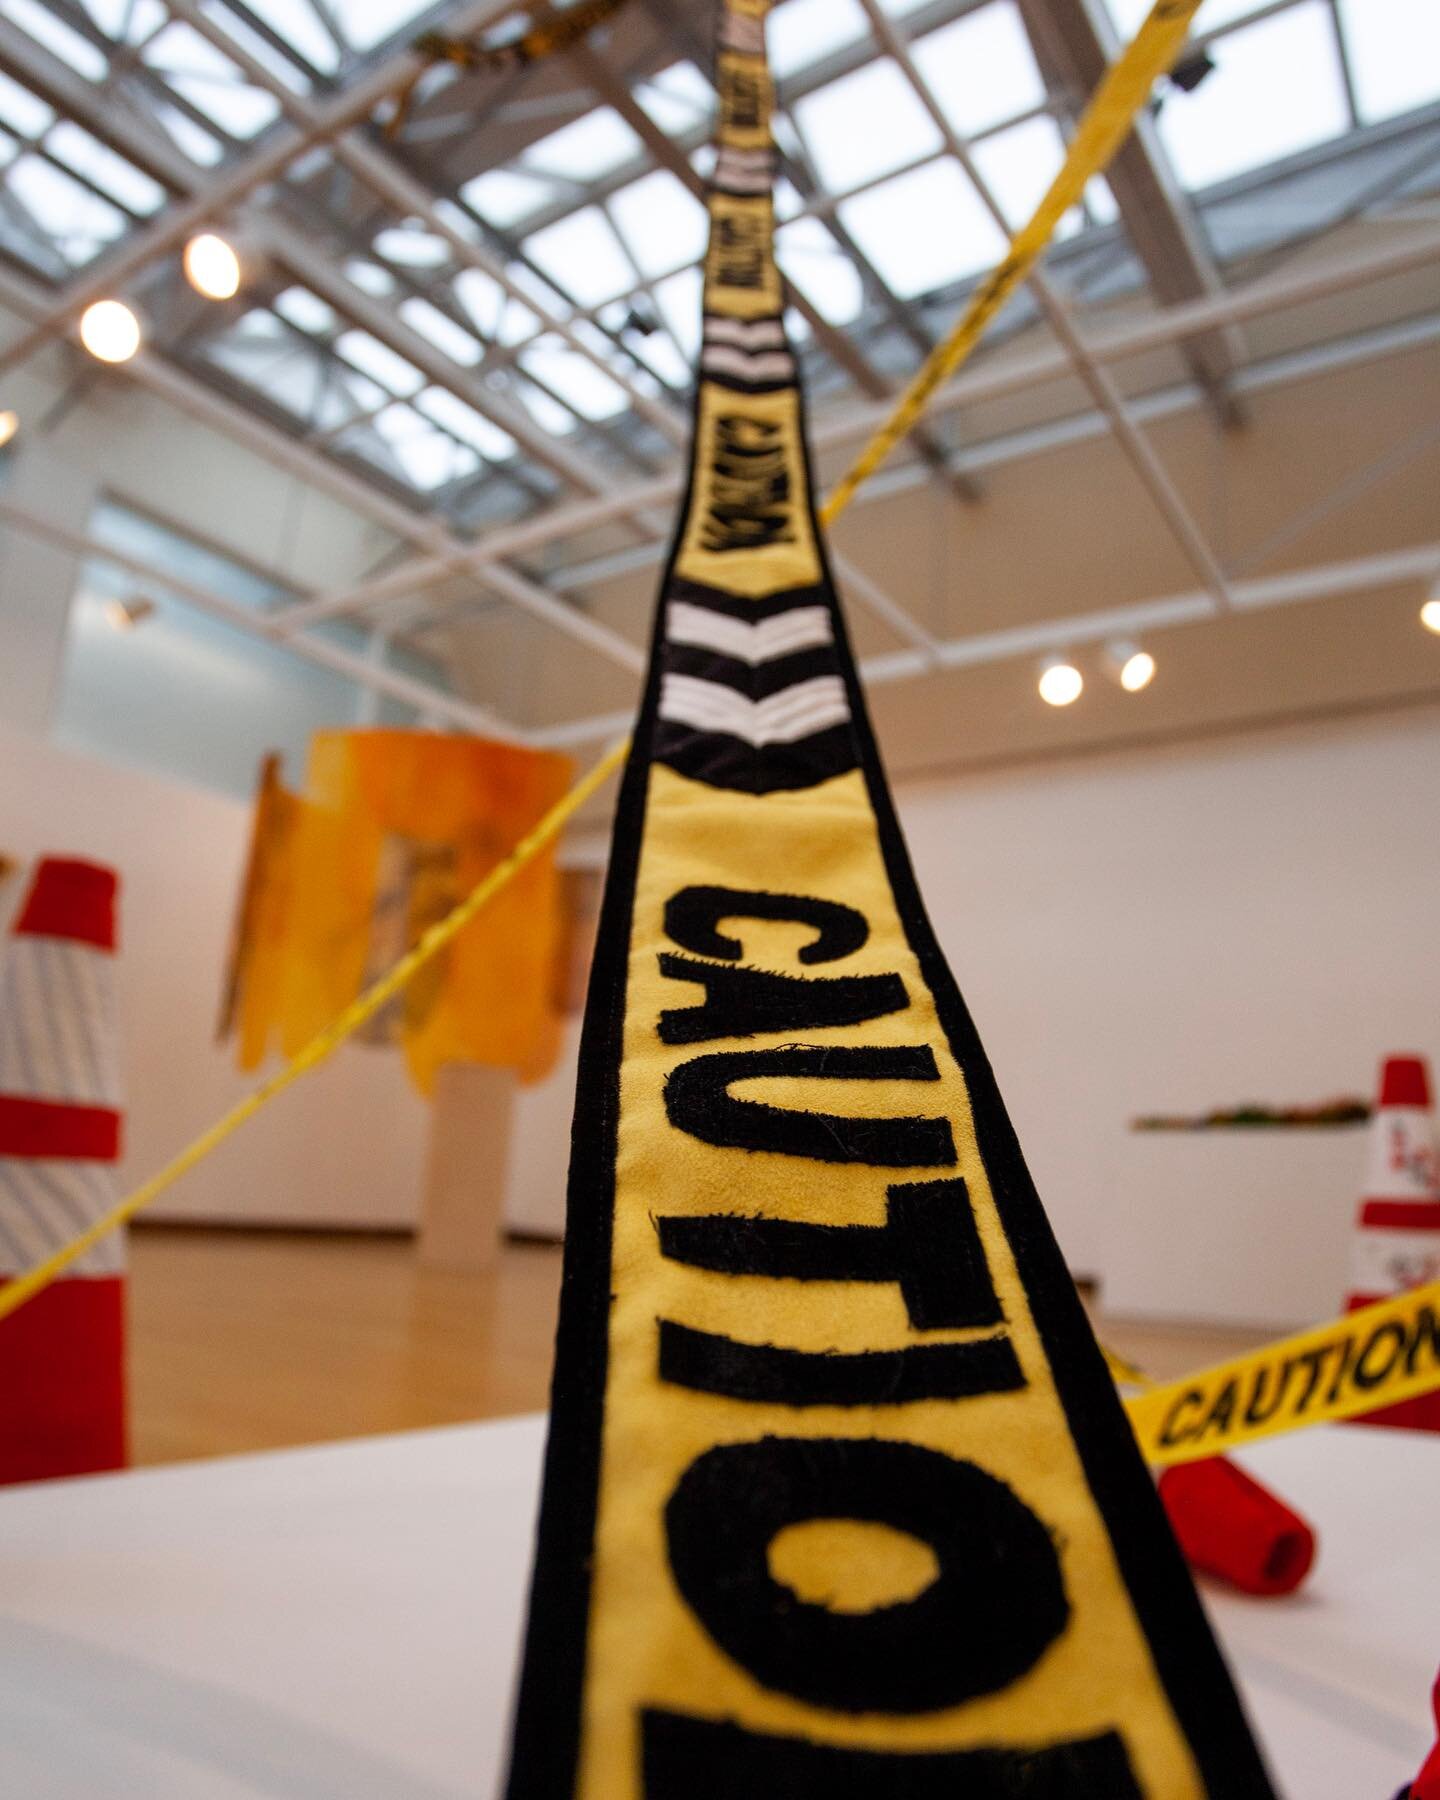 Crafted from a combination of plush velvet and suede remnants, this caution tape quilt is tempting to touch, but remember, hands off in the gallery lol😂

You can view the entire &ldquo;Take Caution&rdquo; project in person at the Jewett Art Gallery 